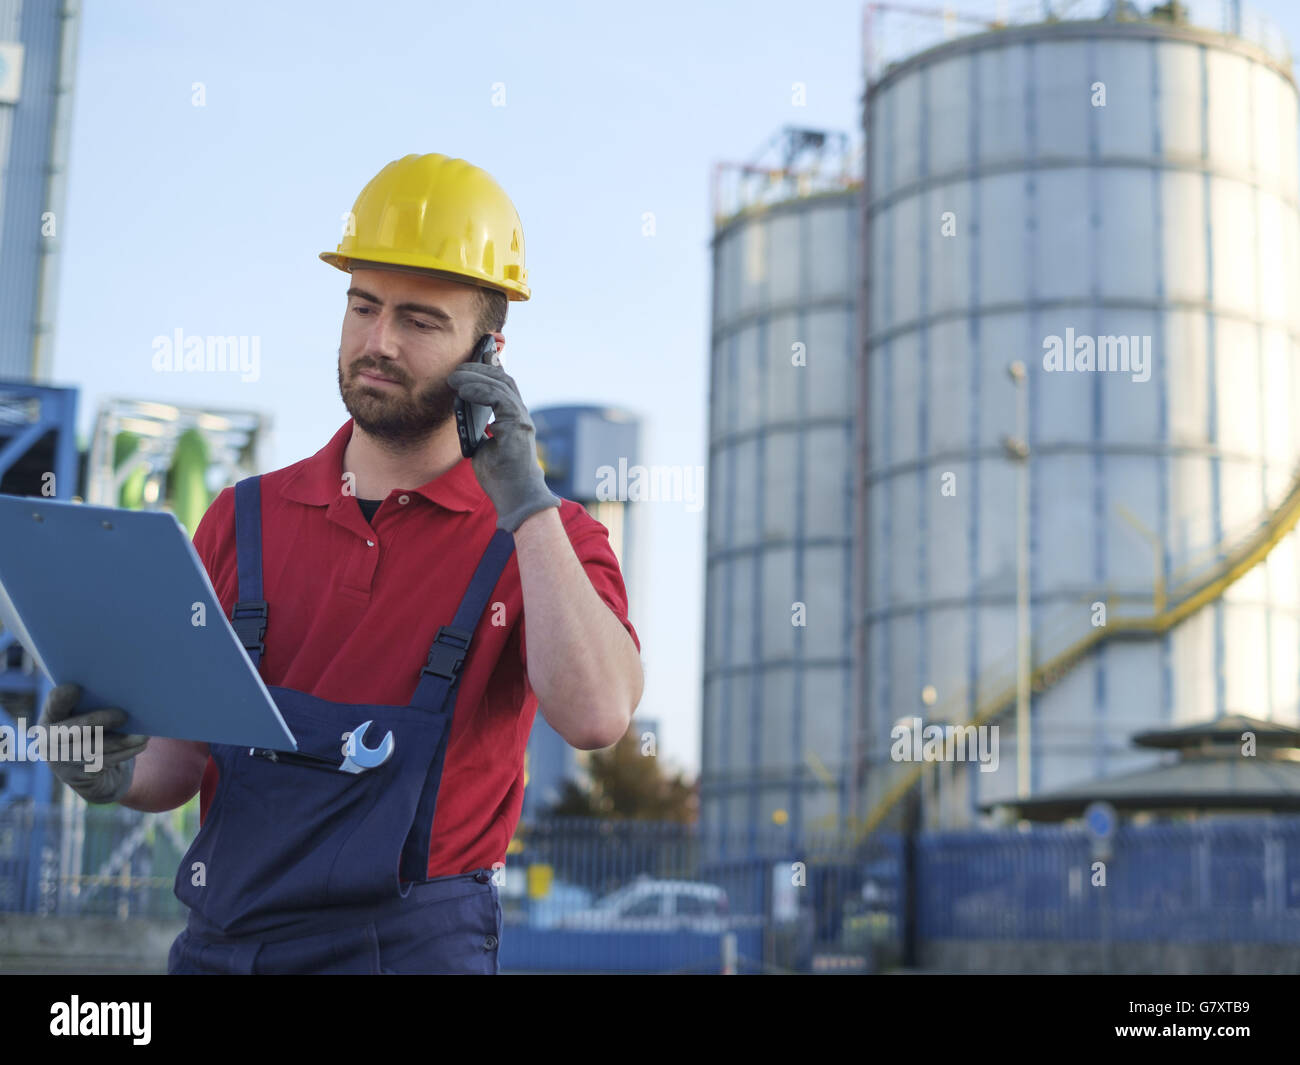 Laborer outside a factory working dressed with safety overalls equipment Stock Photo